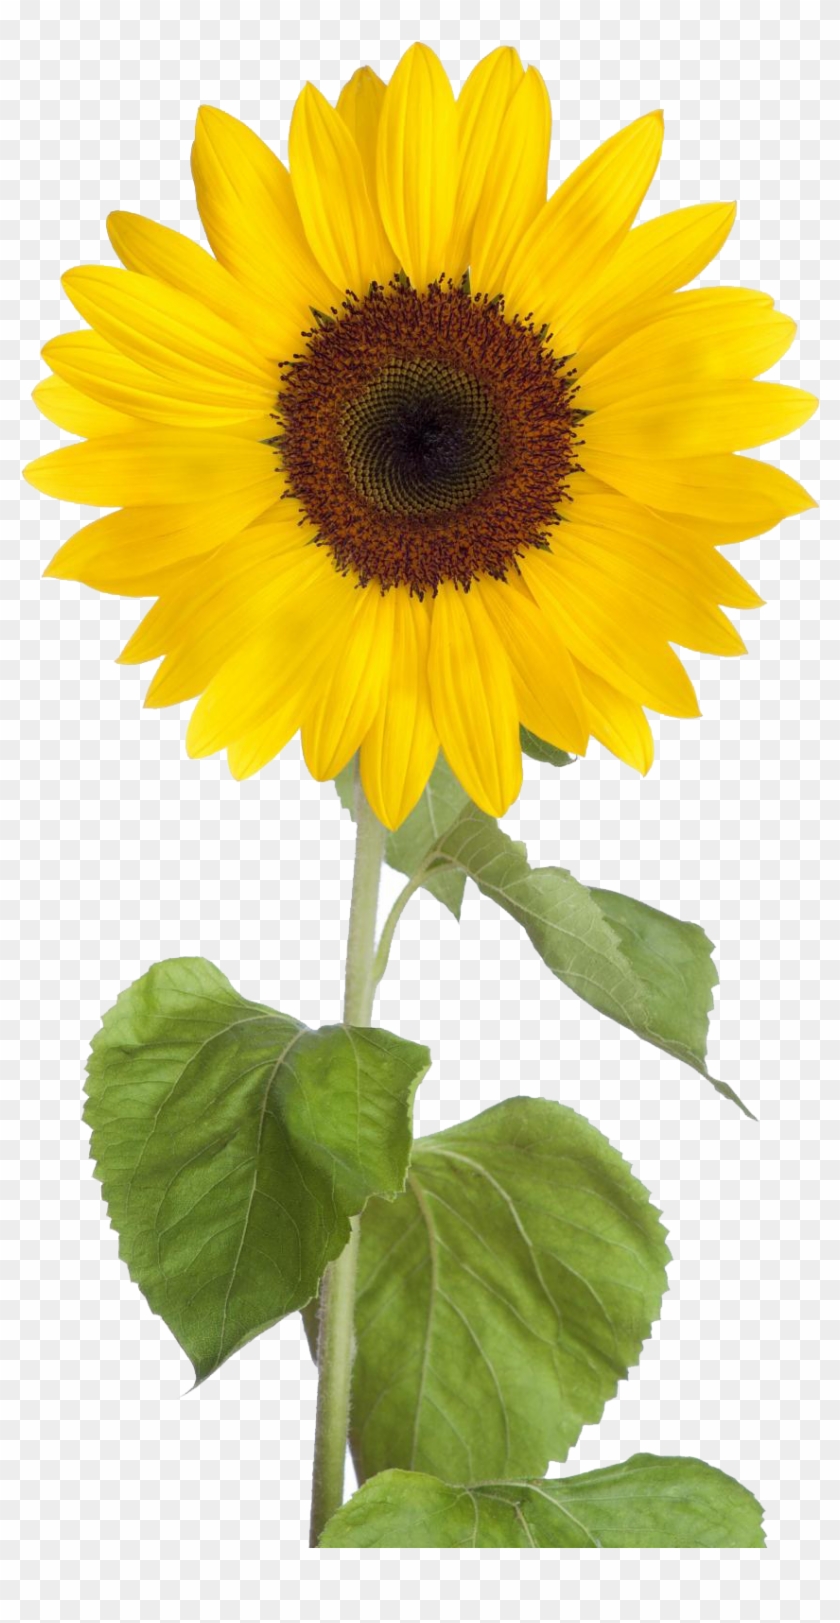 Download Sunflower clipart real pictures on Cliparts Pub 2020!